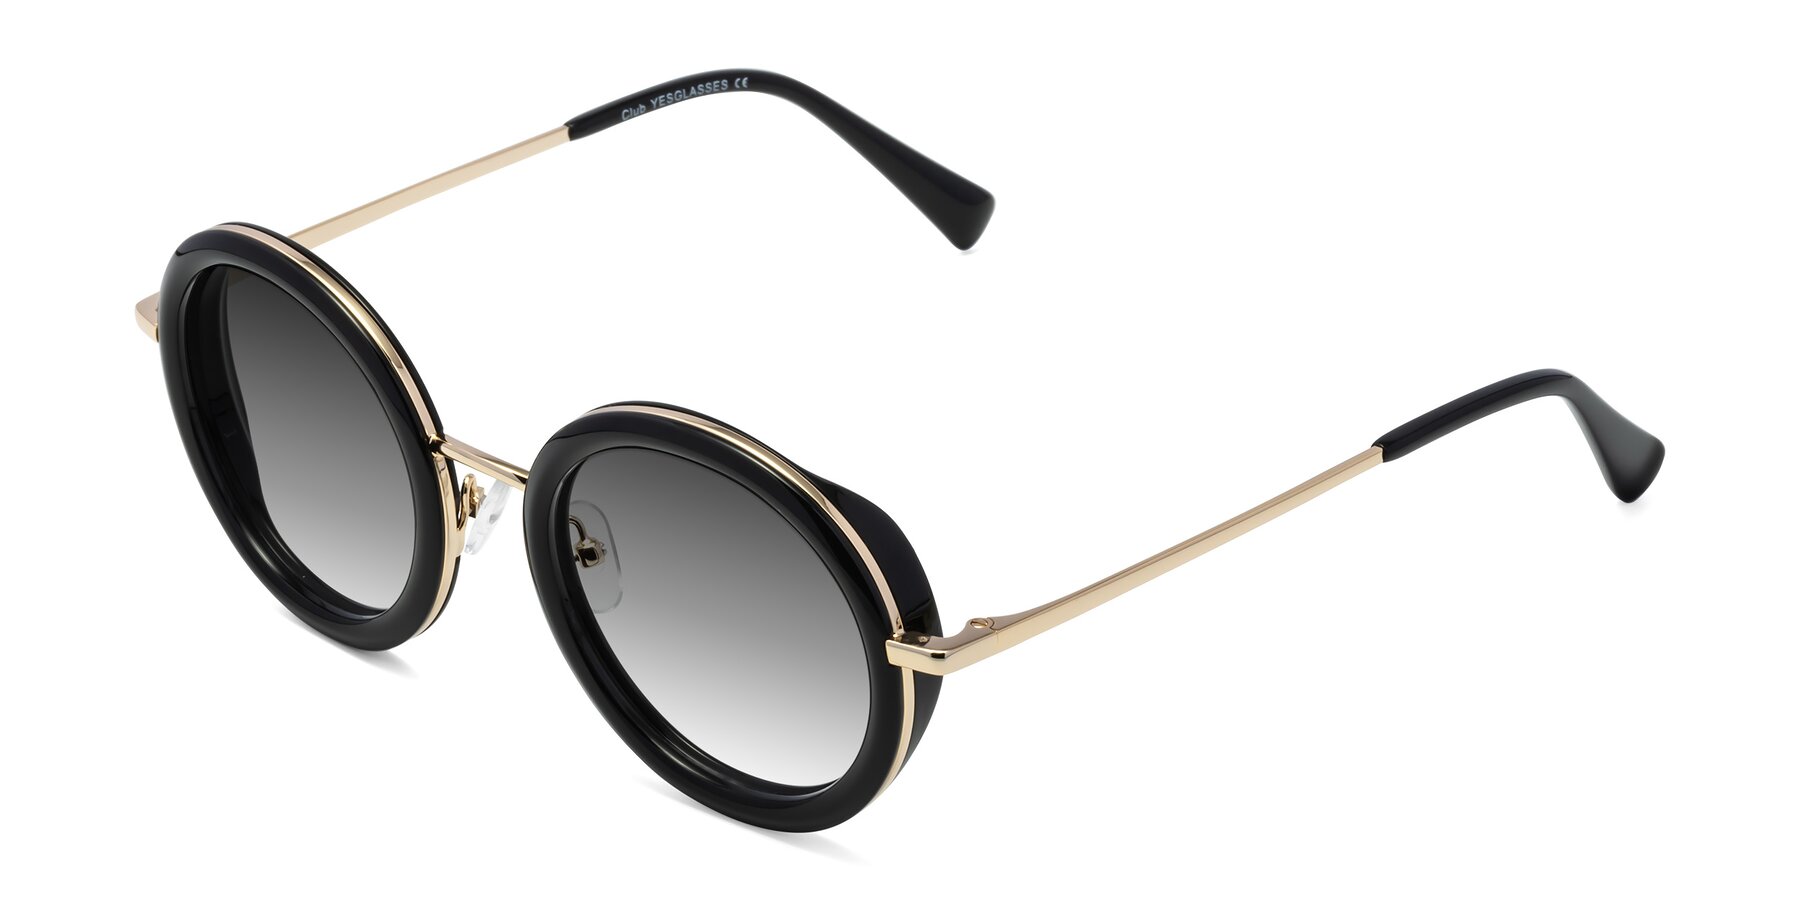 Angle of Club in Black-Gold with Gray Gradient Lenses